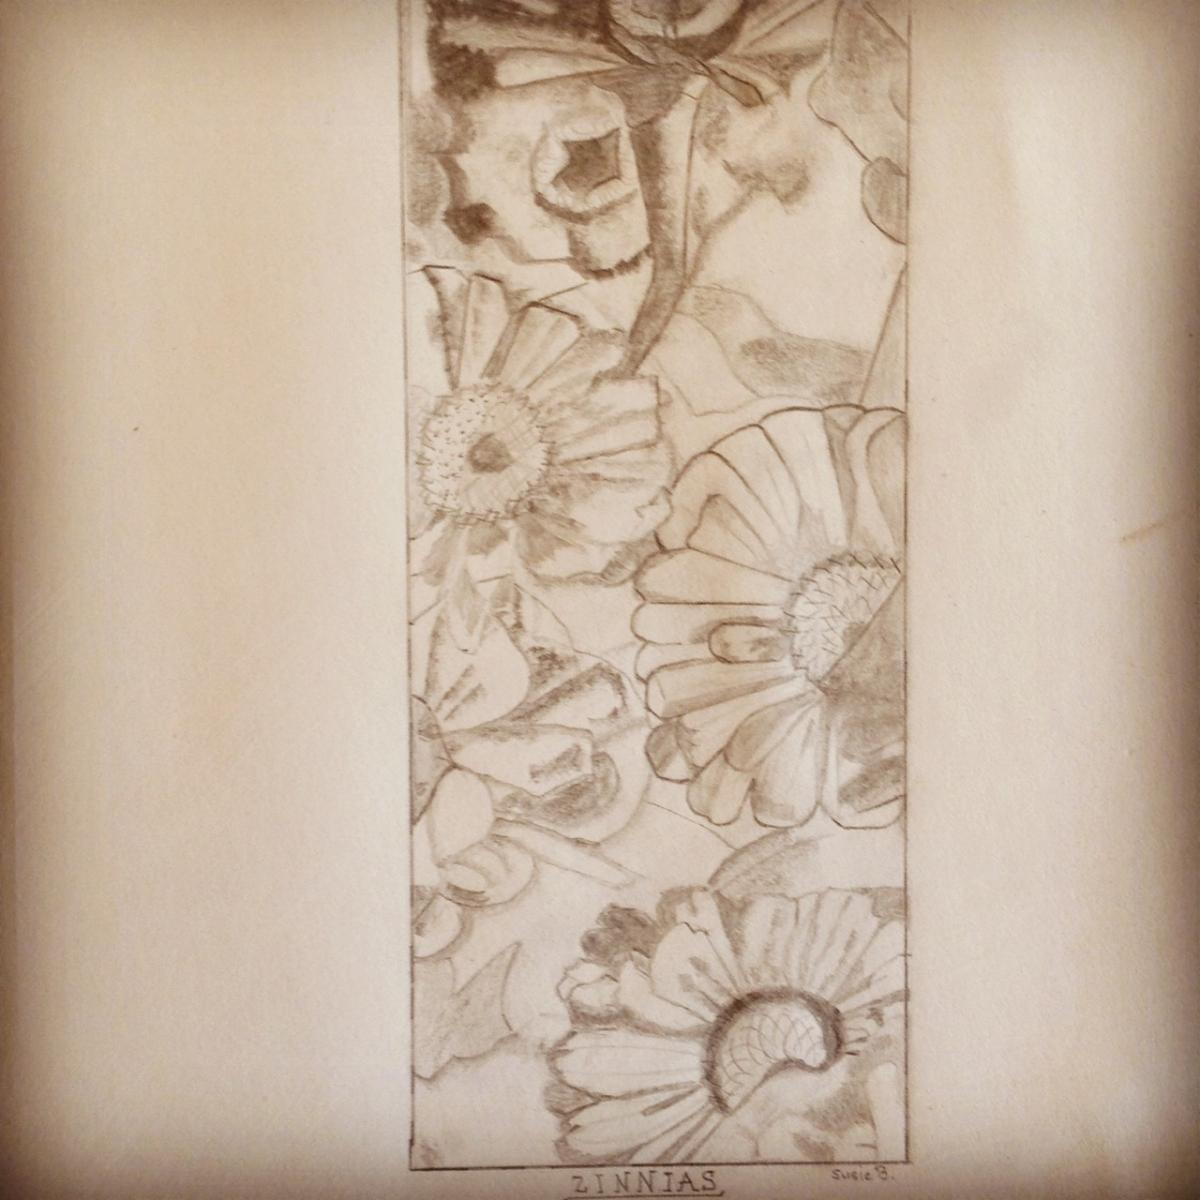 "Zinnias" in Pencil from The book By Malcolm Hillier "FLOWERS" Original Photo taken by Stephen Hayward (For Sale $125) : Still Life : Susan Braha Photography and Fine Art